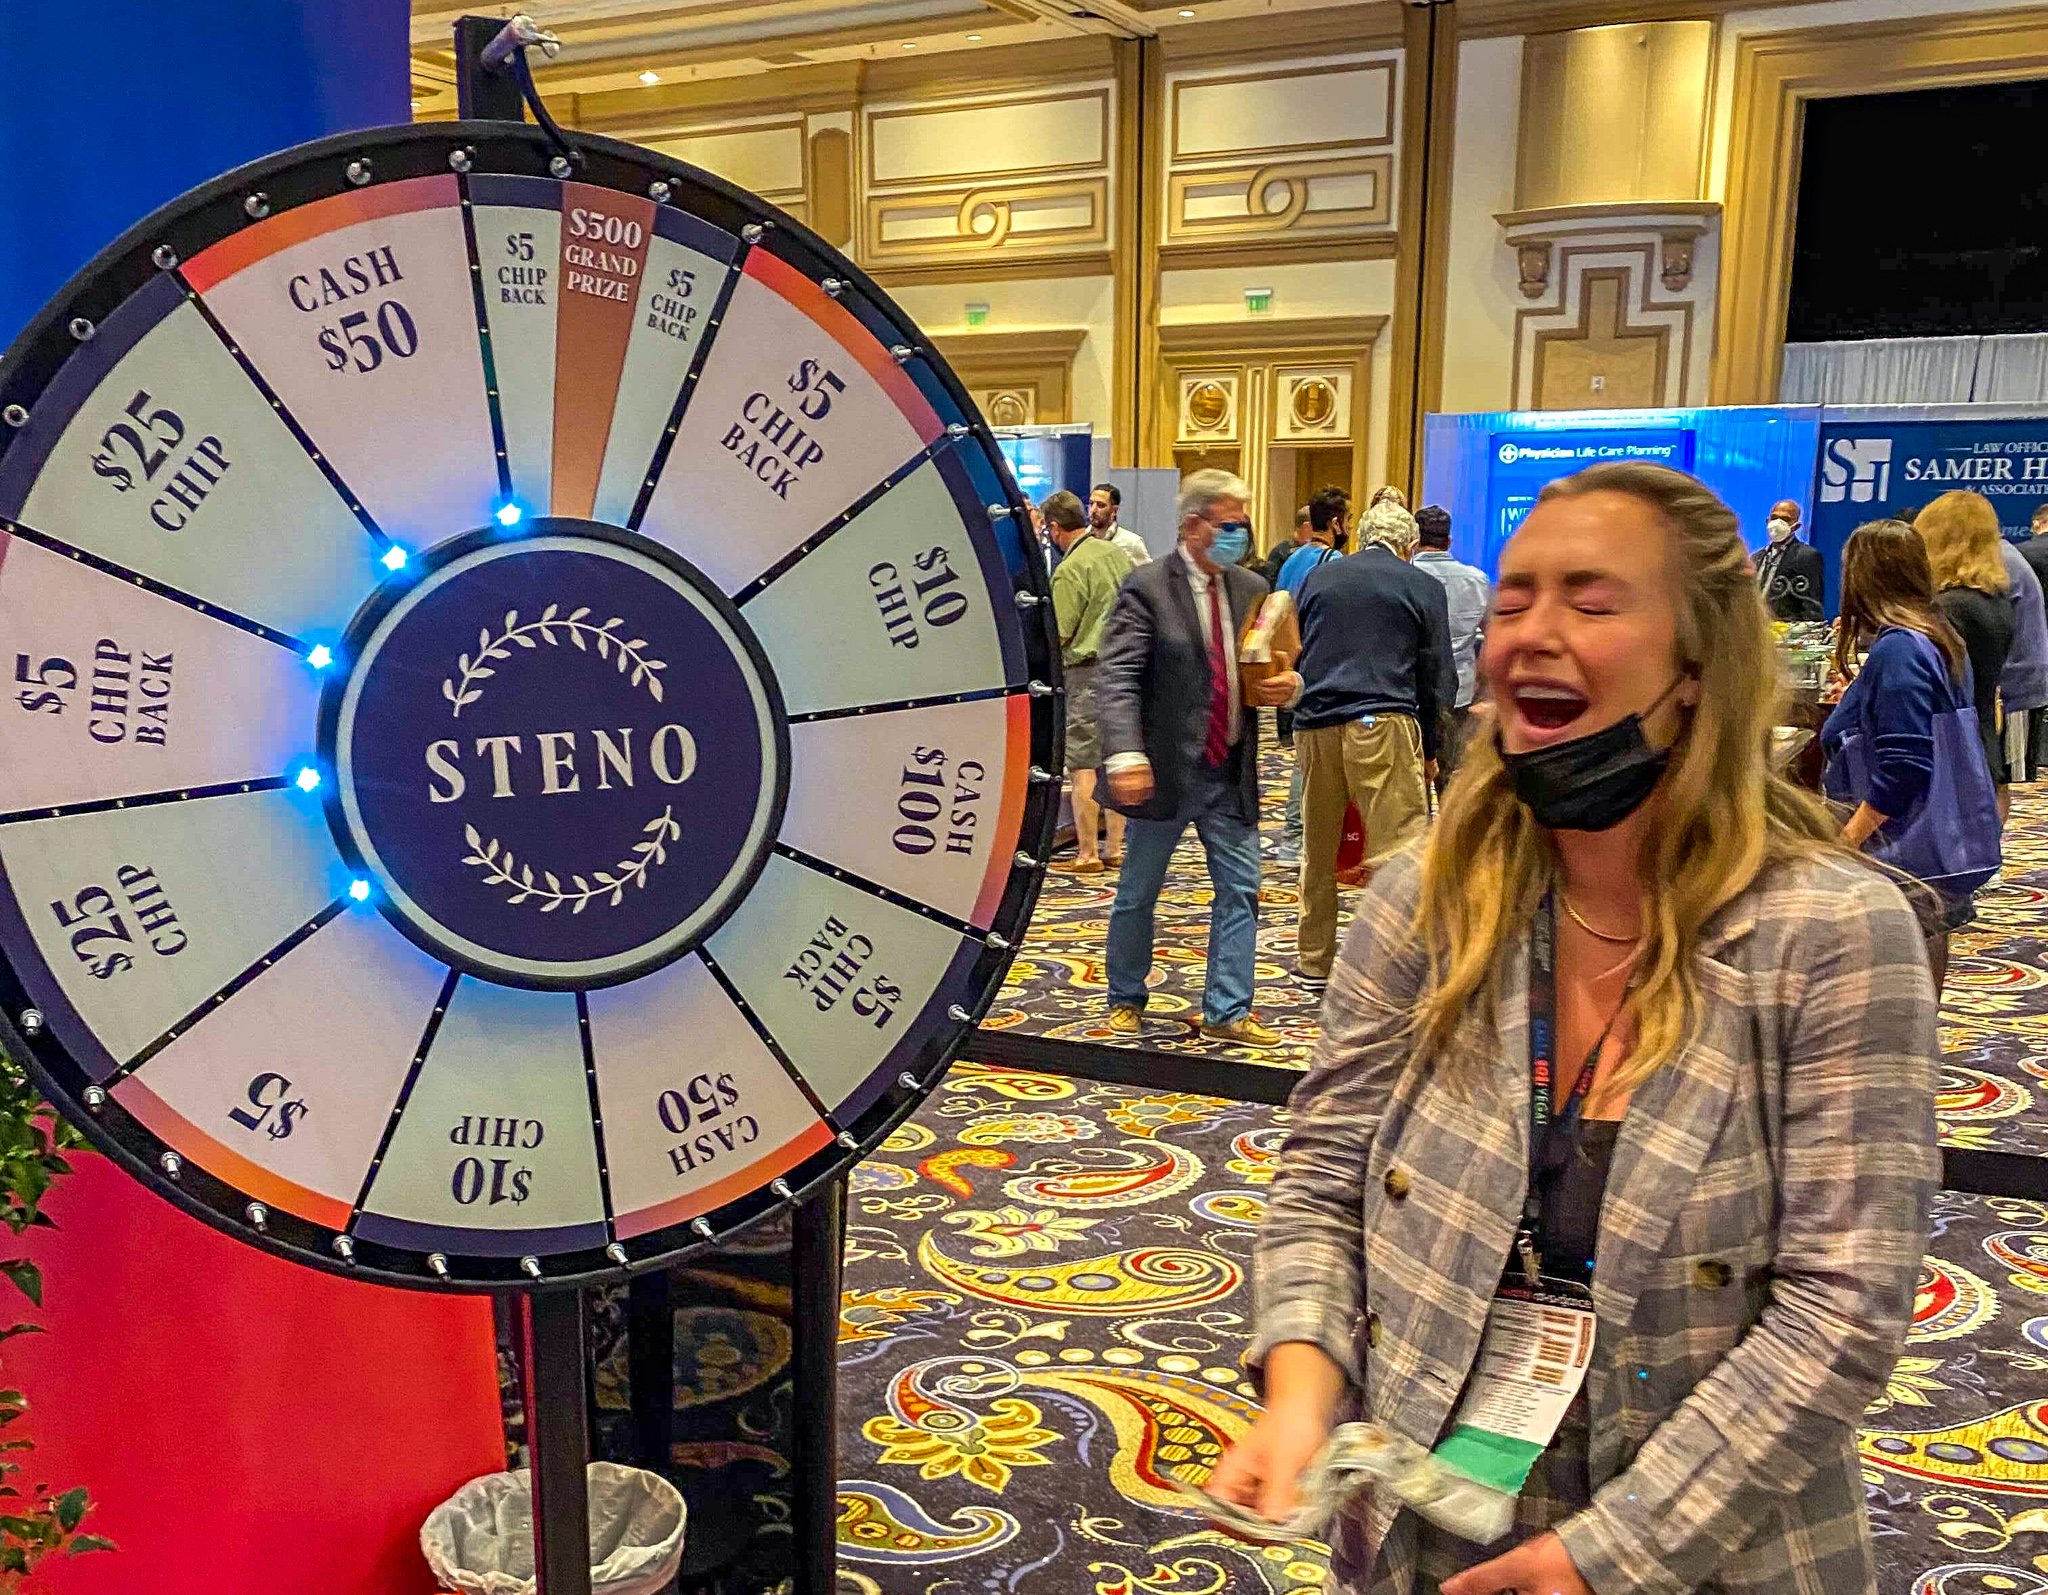 A blonde woman smiles with her eyes closed and in the background a light-up prize wheel has landed on a space that says "$500 grand prize"